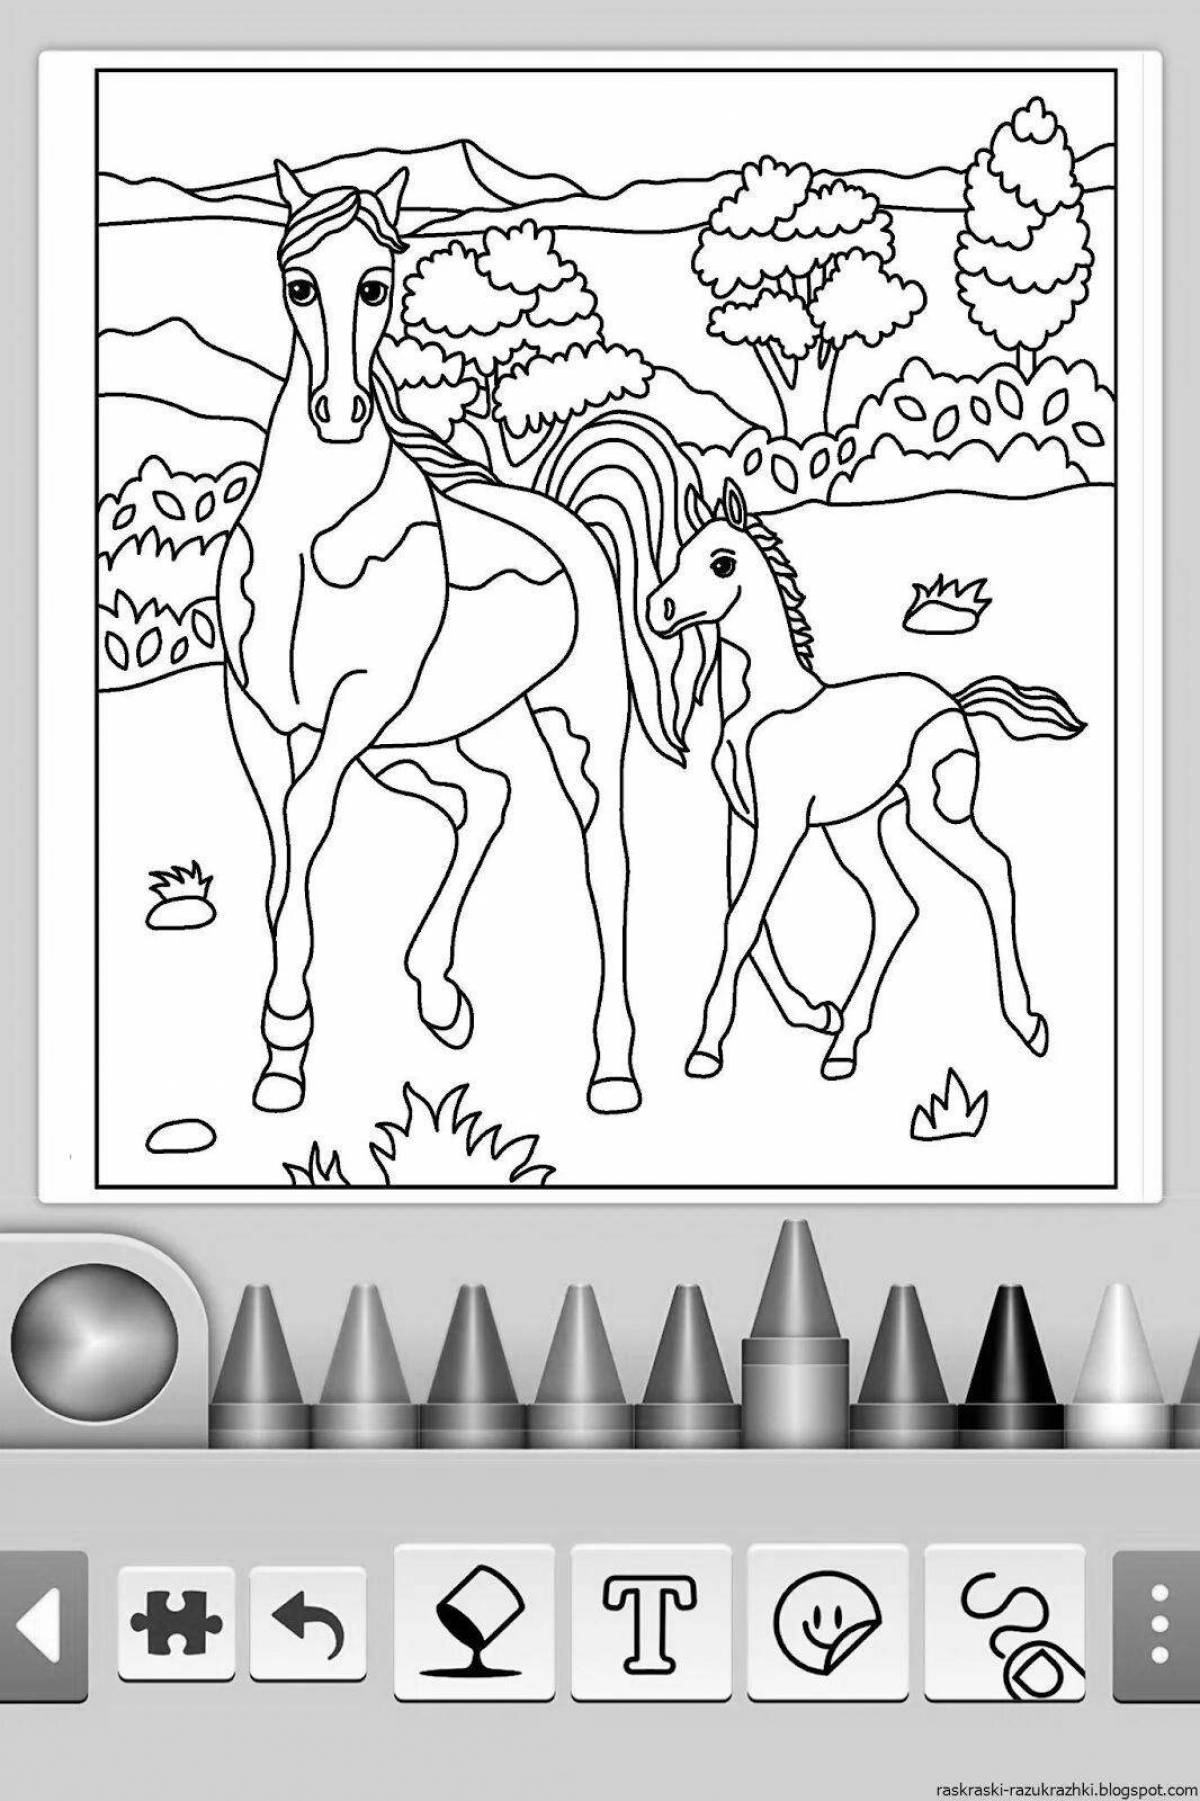 Colorful phone games coloring book